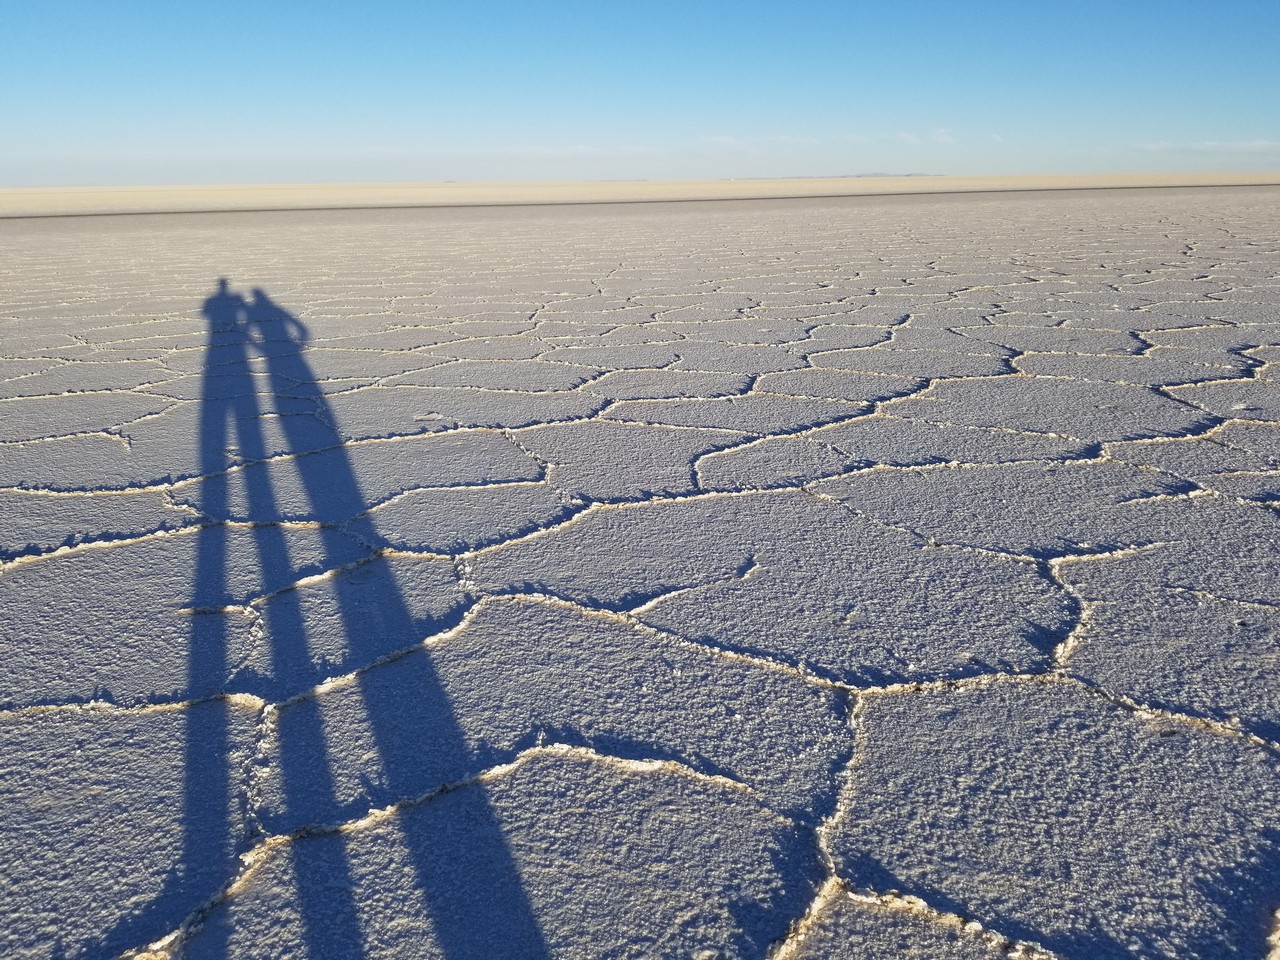 a shadow of two people on a flat surface